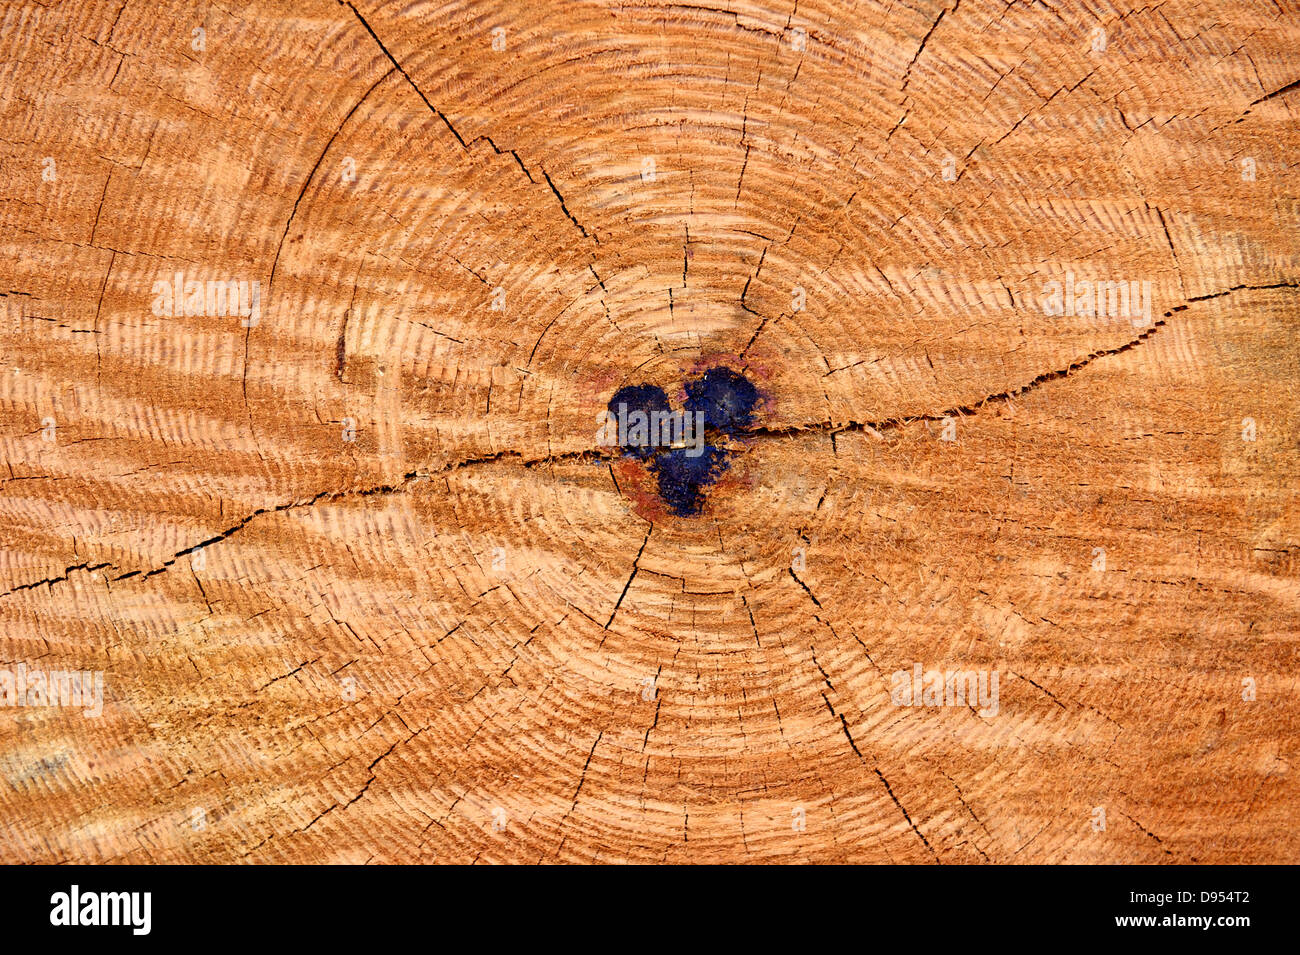 Heart shape drawn on the a redwood log Stock Photo